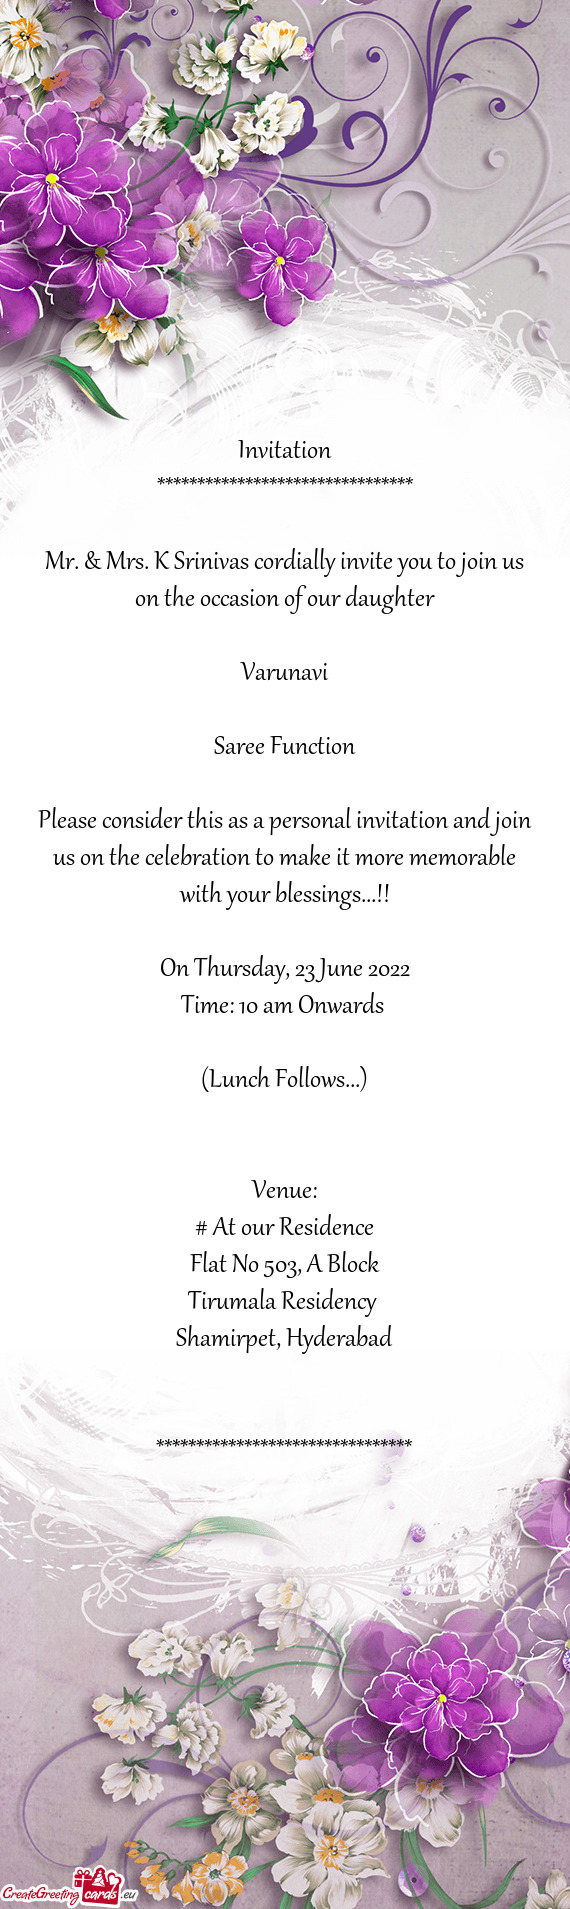 Mr. & Mrs. K Srinivas cordially invite you to join us on the occasion of our daughter